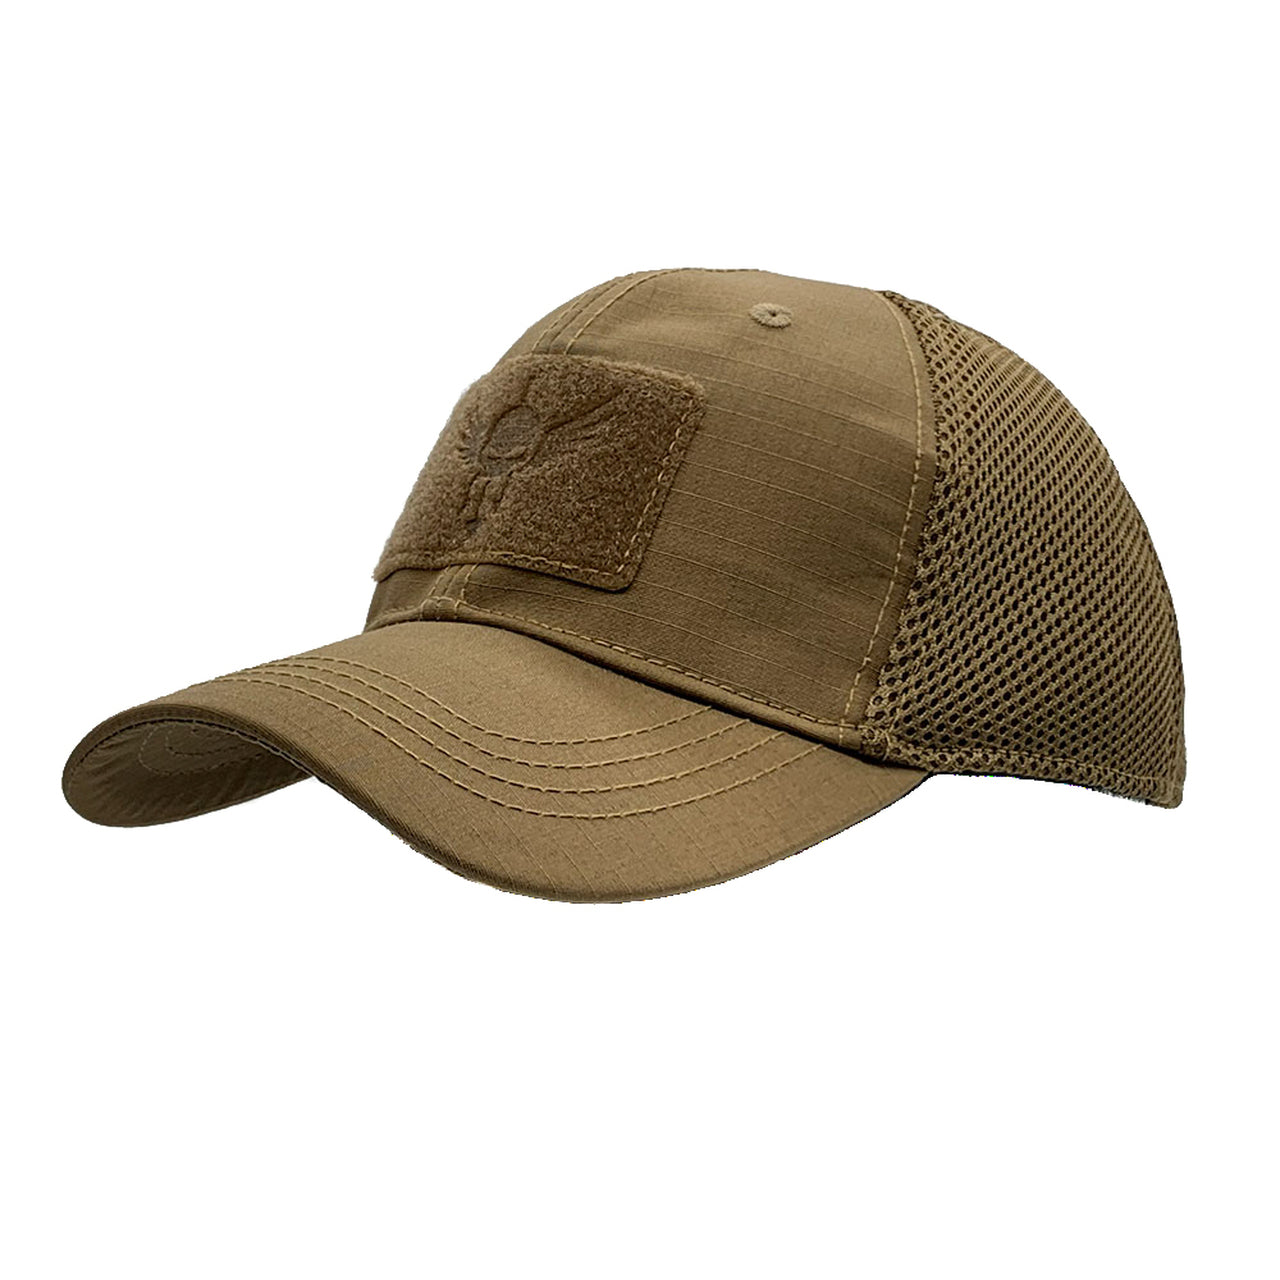 A Shellback Tactical Flex Tactical Cap with a mesh patch on the front.